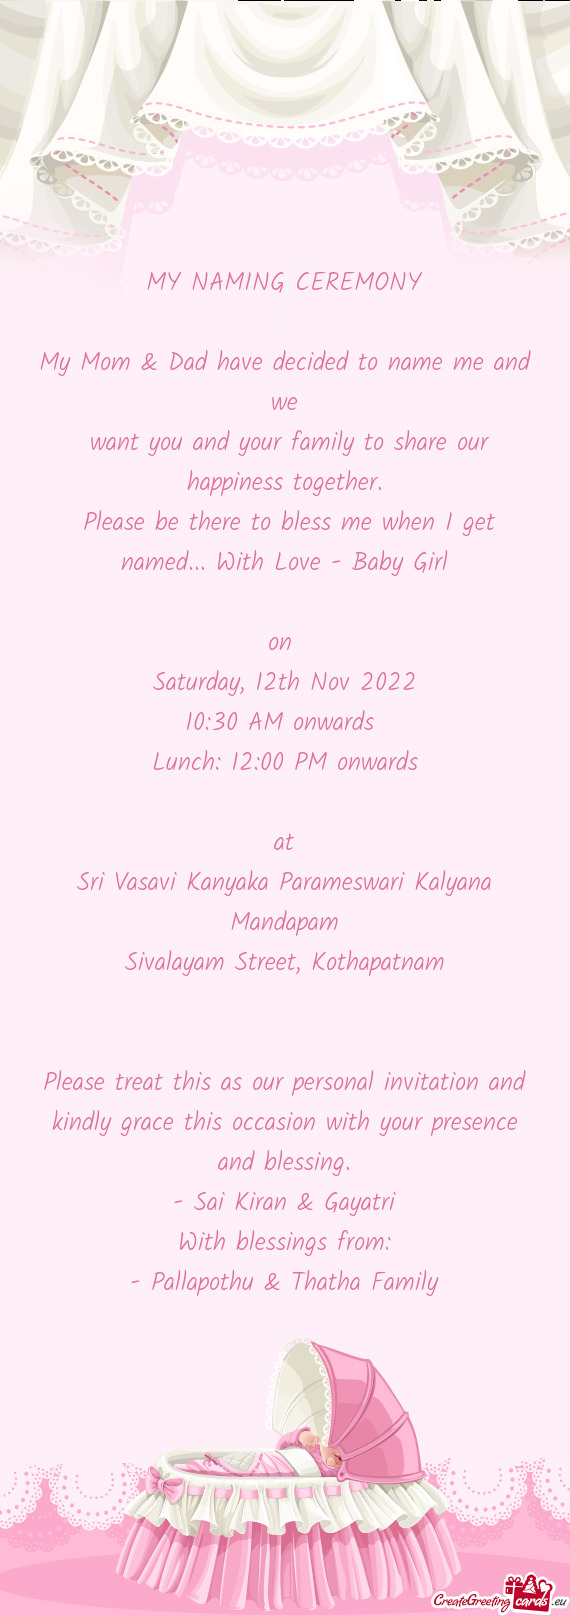 Please be there to bless me when I get named... With Love - Baby Girl